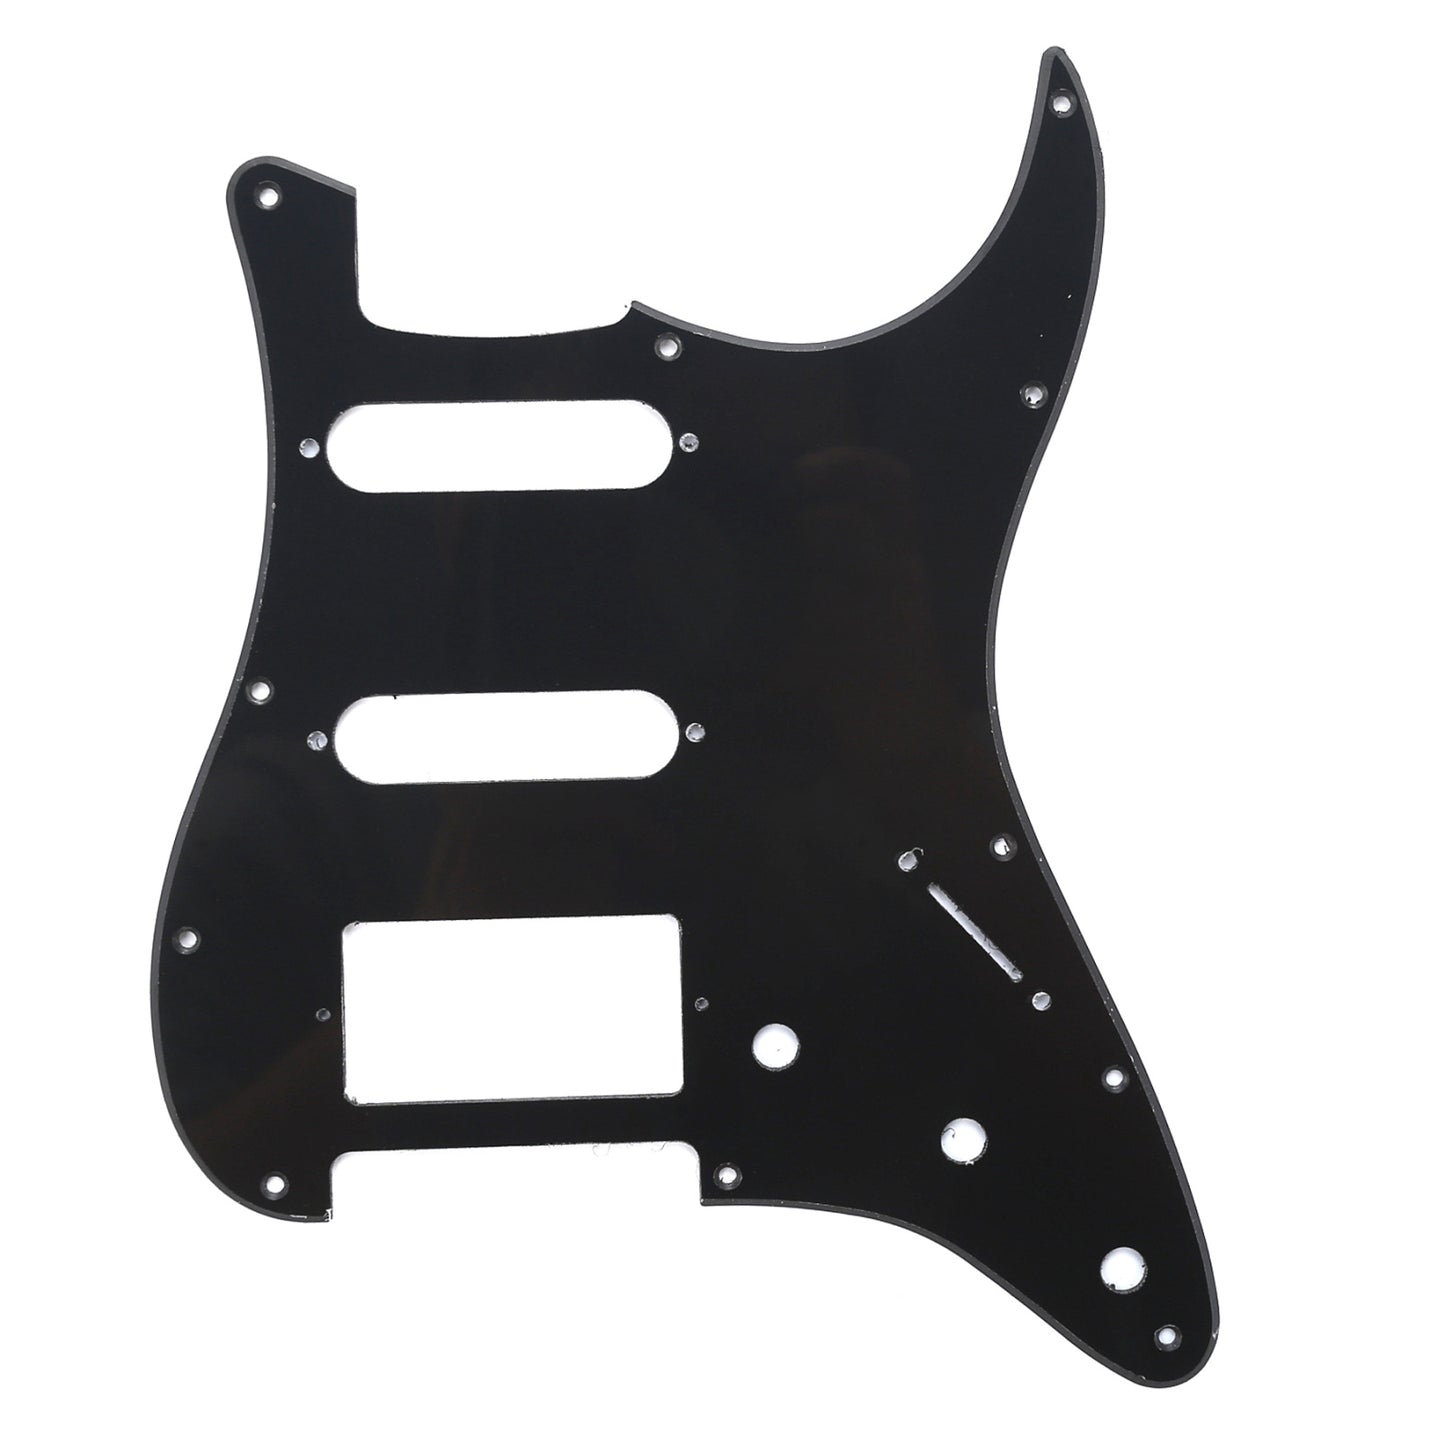 Musiclily HSS 11 Hole Guitar Strat Pickguard for Fender USA/Mexican Made Standard Stratocaster Modern Style,1Ply Black